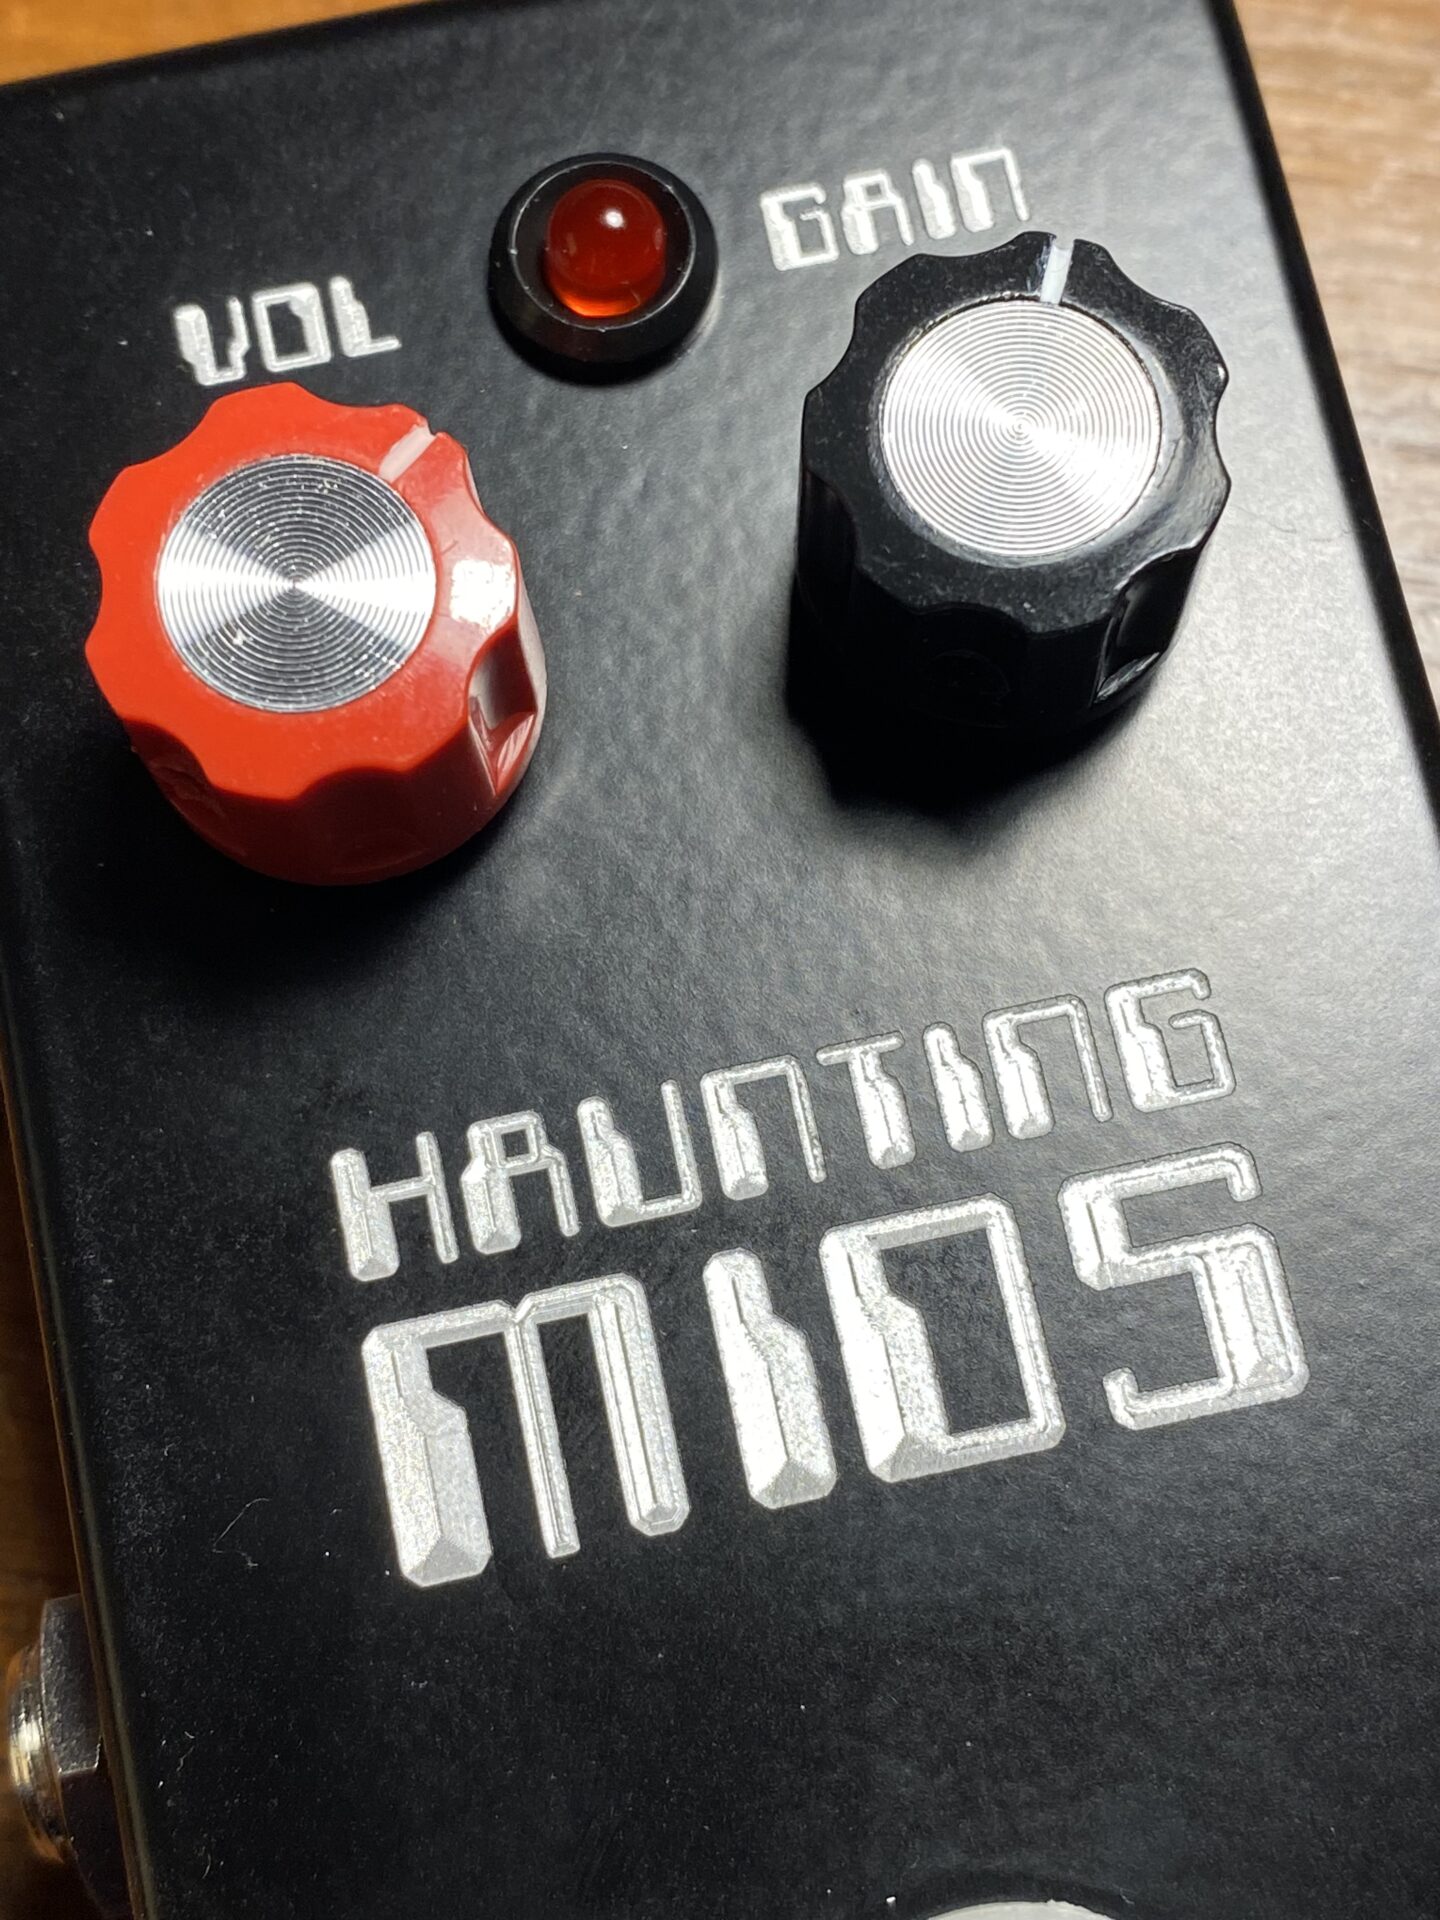 Haunting Mids project